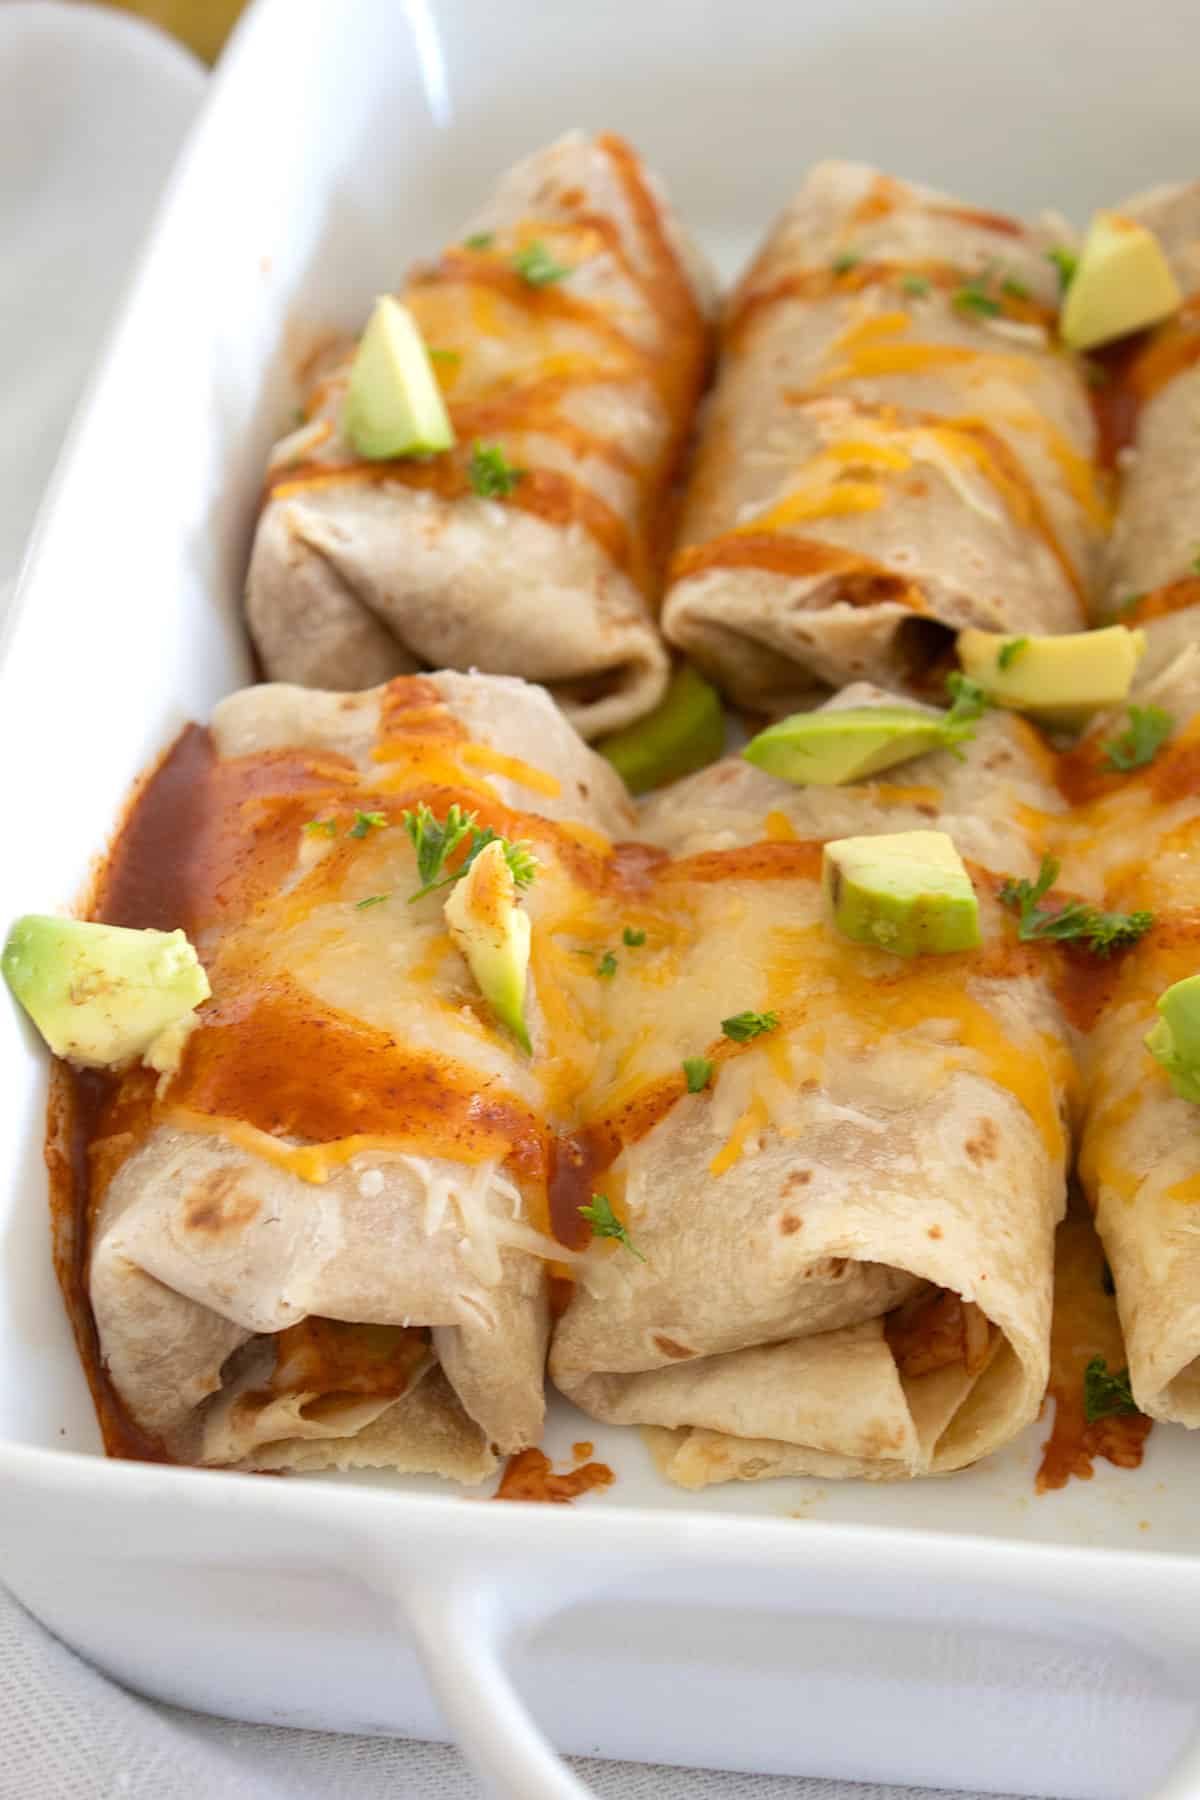 baked burritos in a pan with avocado and hot sauce garnish